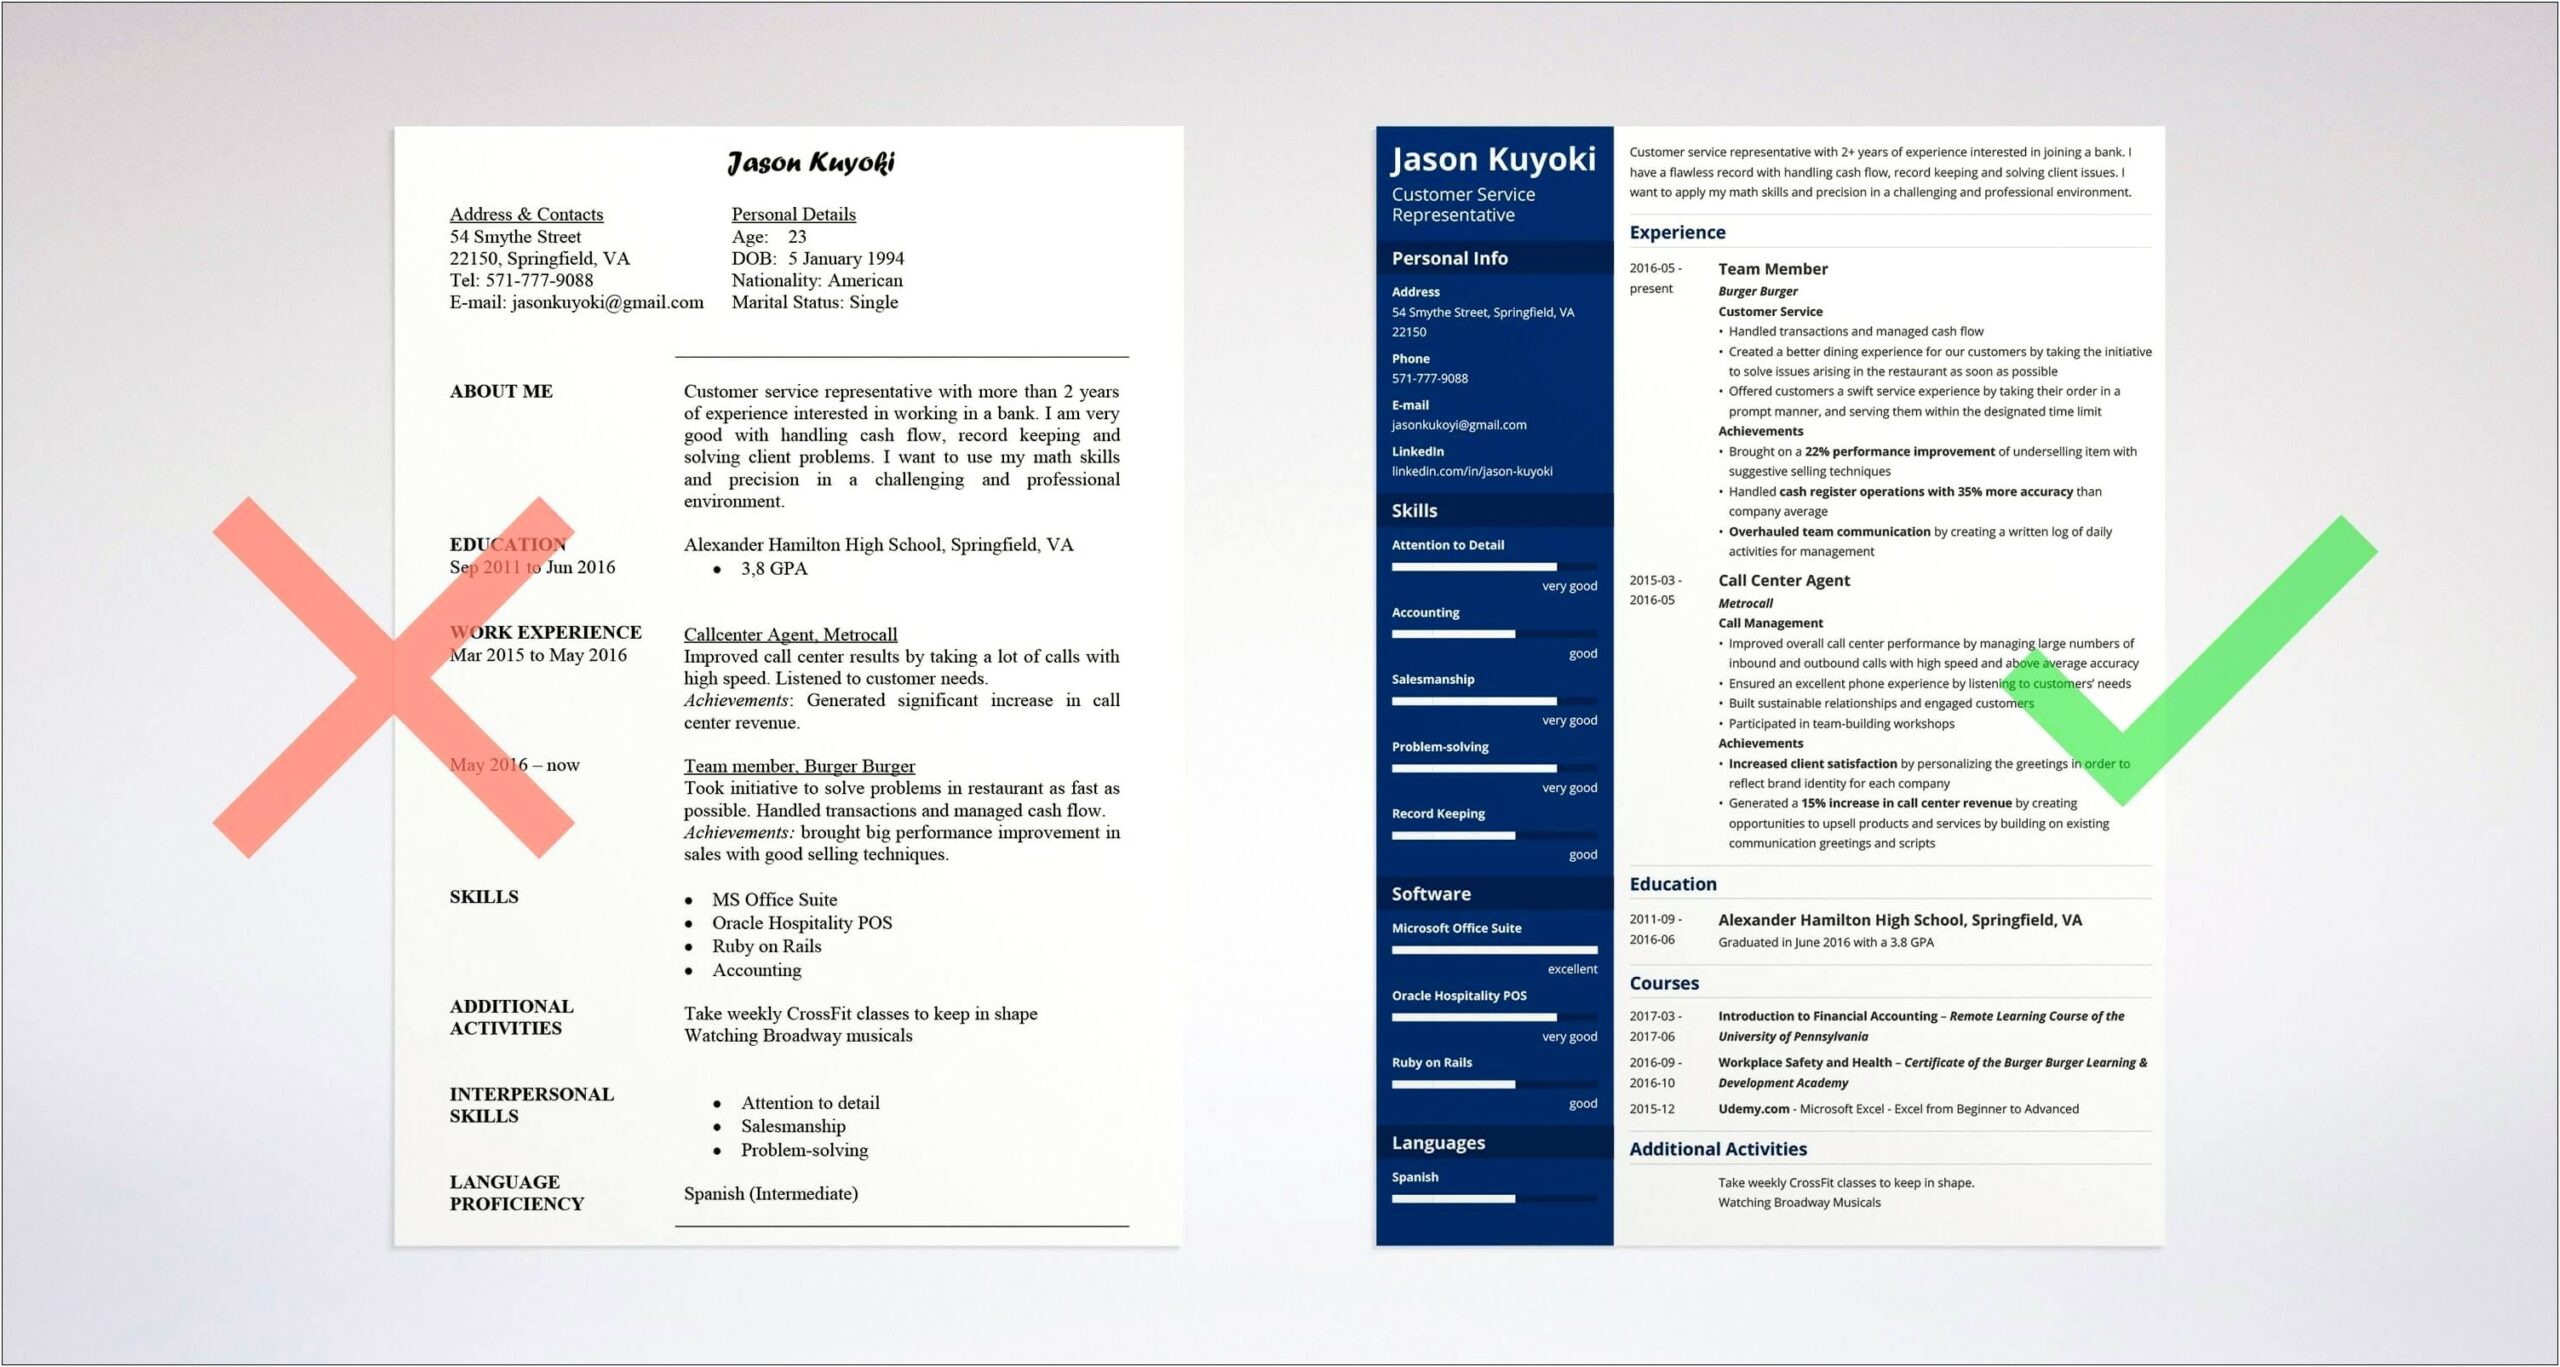 Resume Examples For Bank Teller No Experience